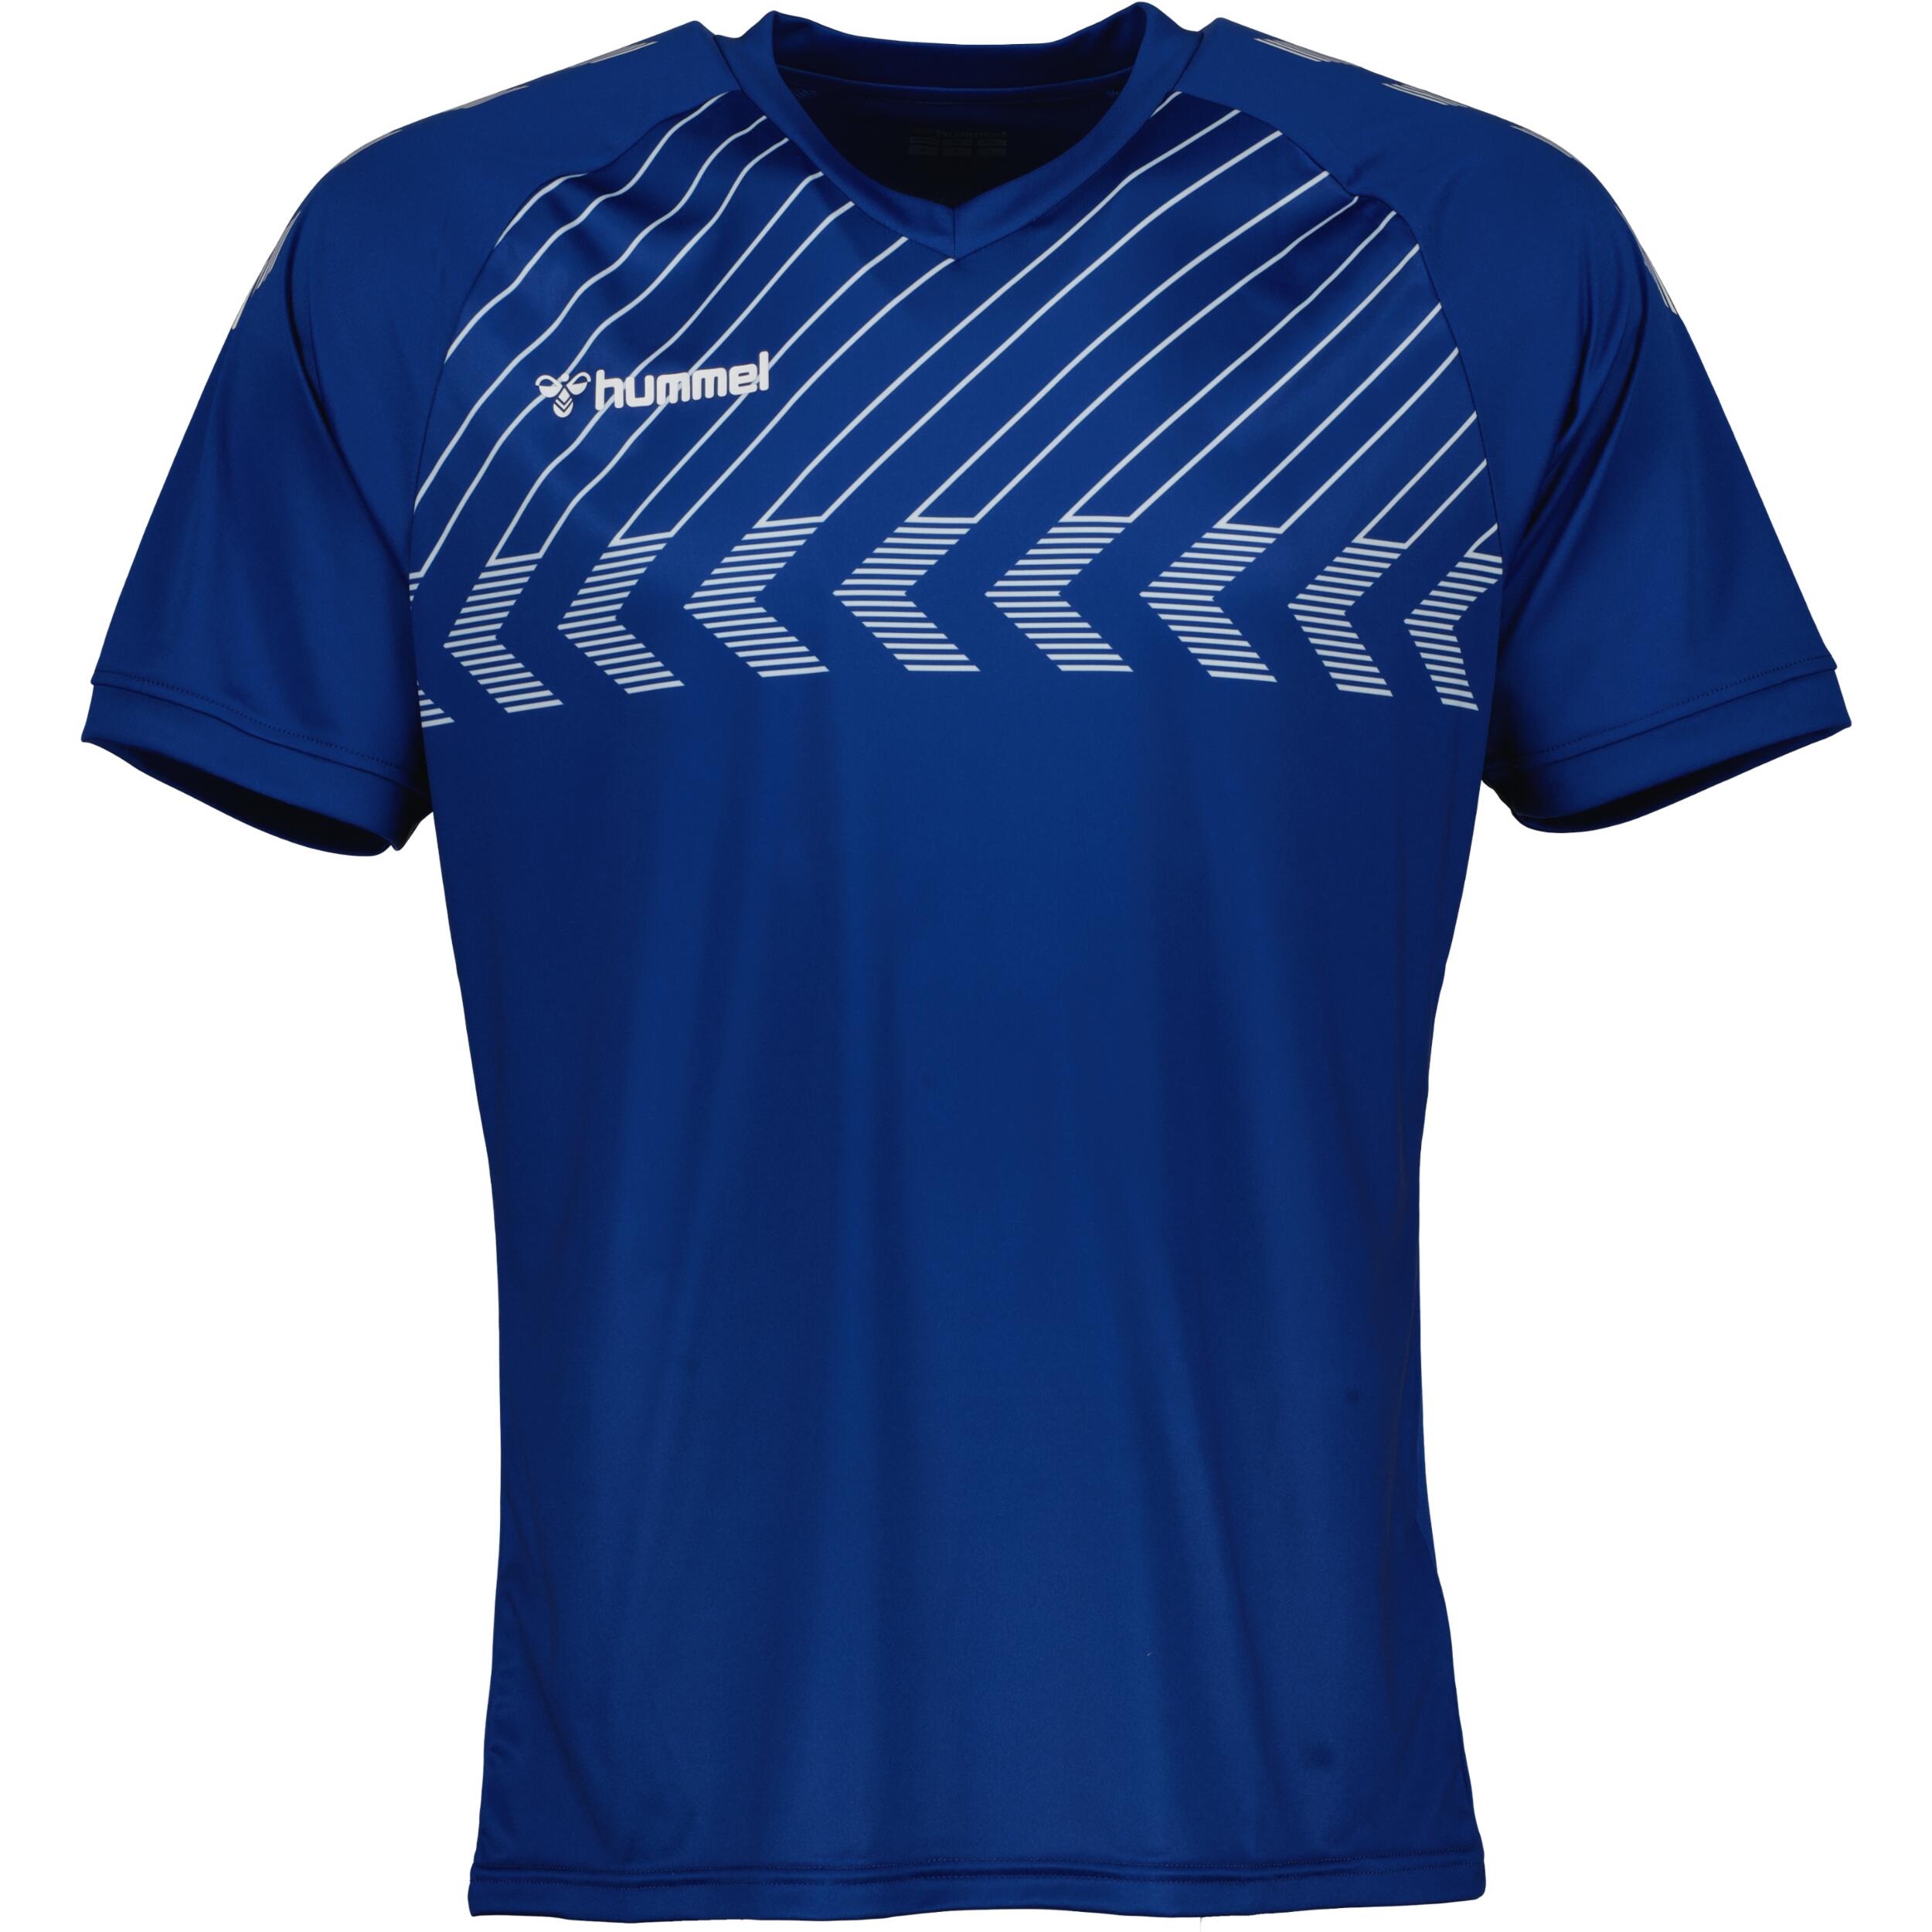 HUMMEL Poly jersey for kids, great for football, in true blue